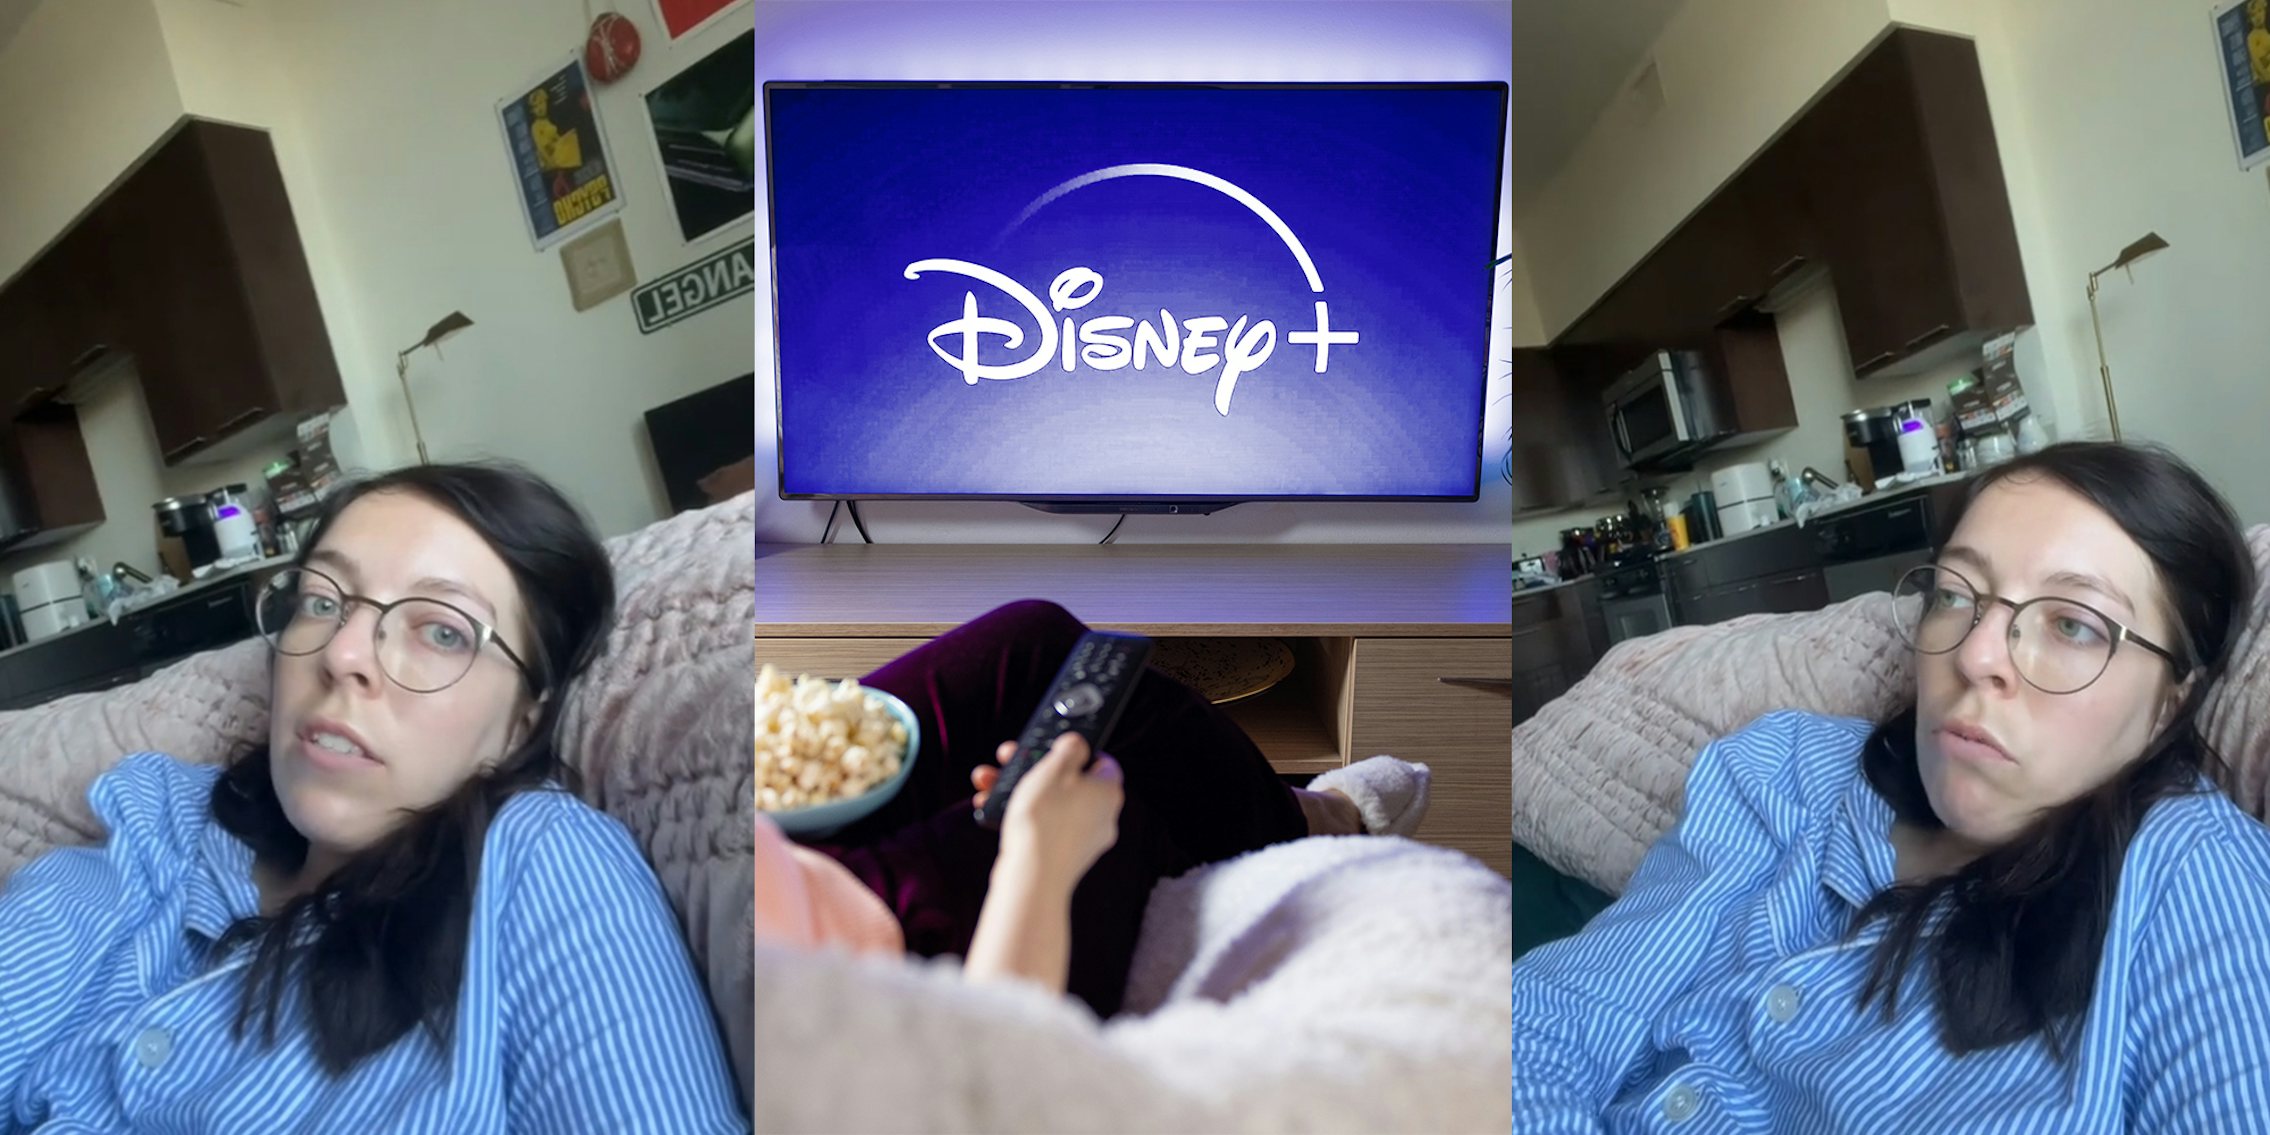 woman laying down on couch; Disney Plus on tv screen while woman eats popcorn